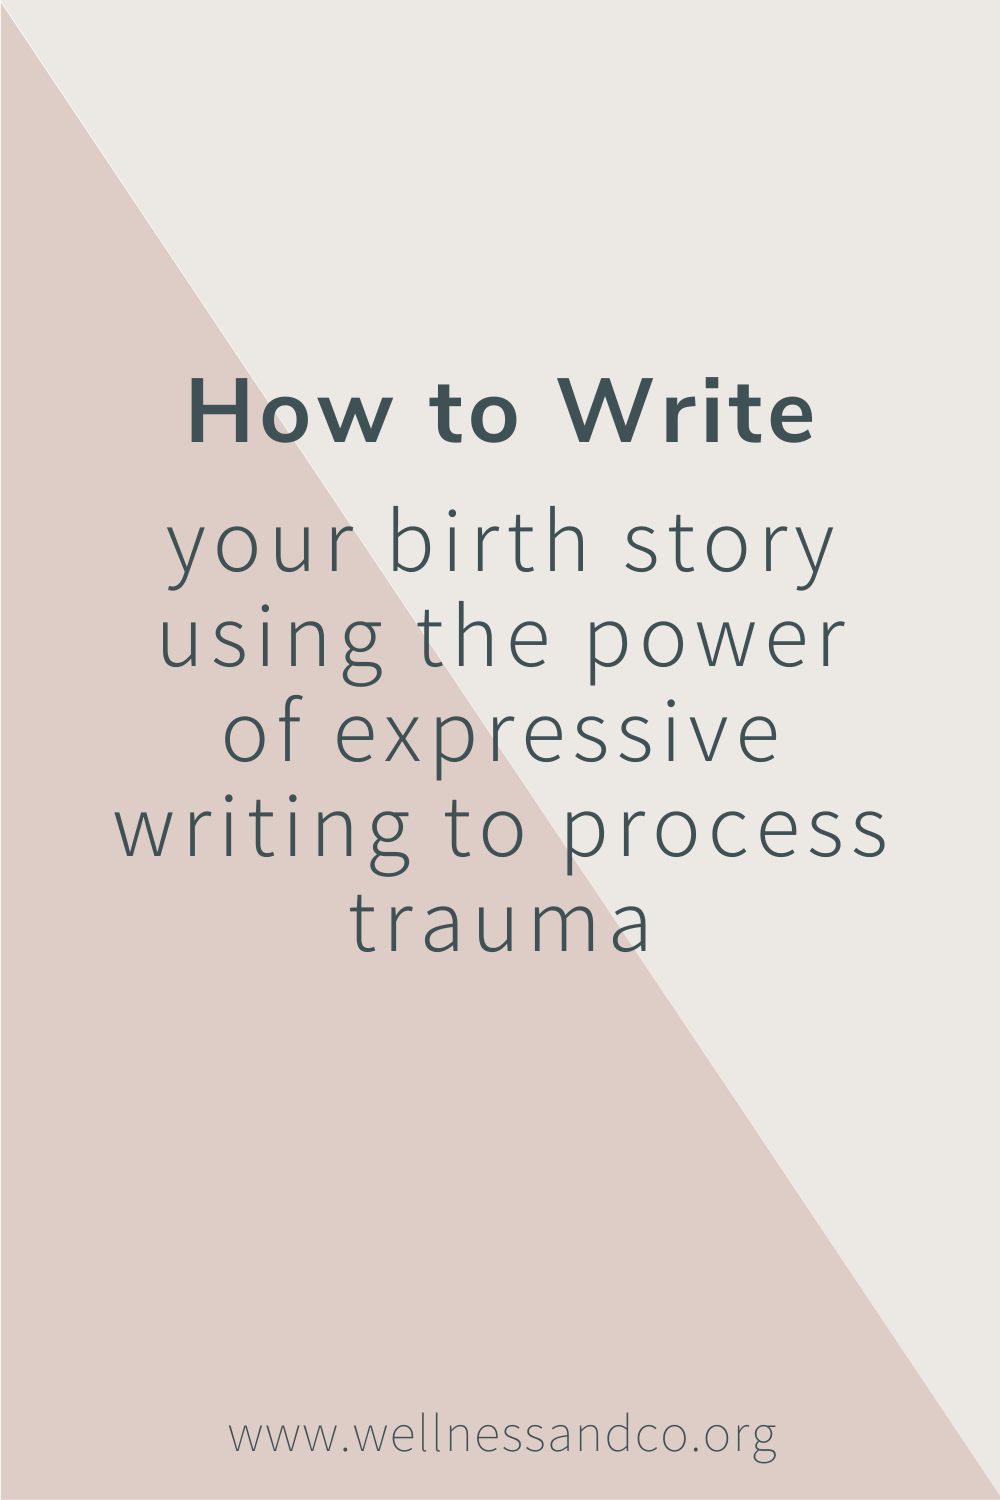 How to Write Your Birth Story: Using the Power of Expressive Writing to Process Trauma | This post uncovers the power of expressive writing as a tool and avenue of healing. Uncover the truth about birth trauma, how it impacts new mothers, and the beauty of being able to heal through writing.